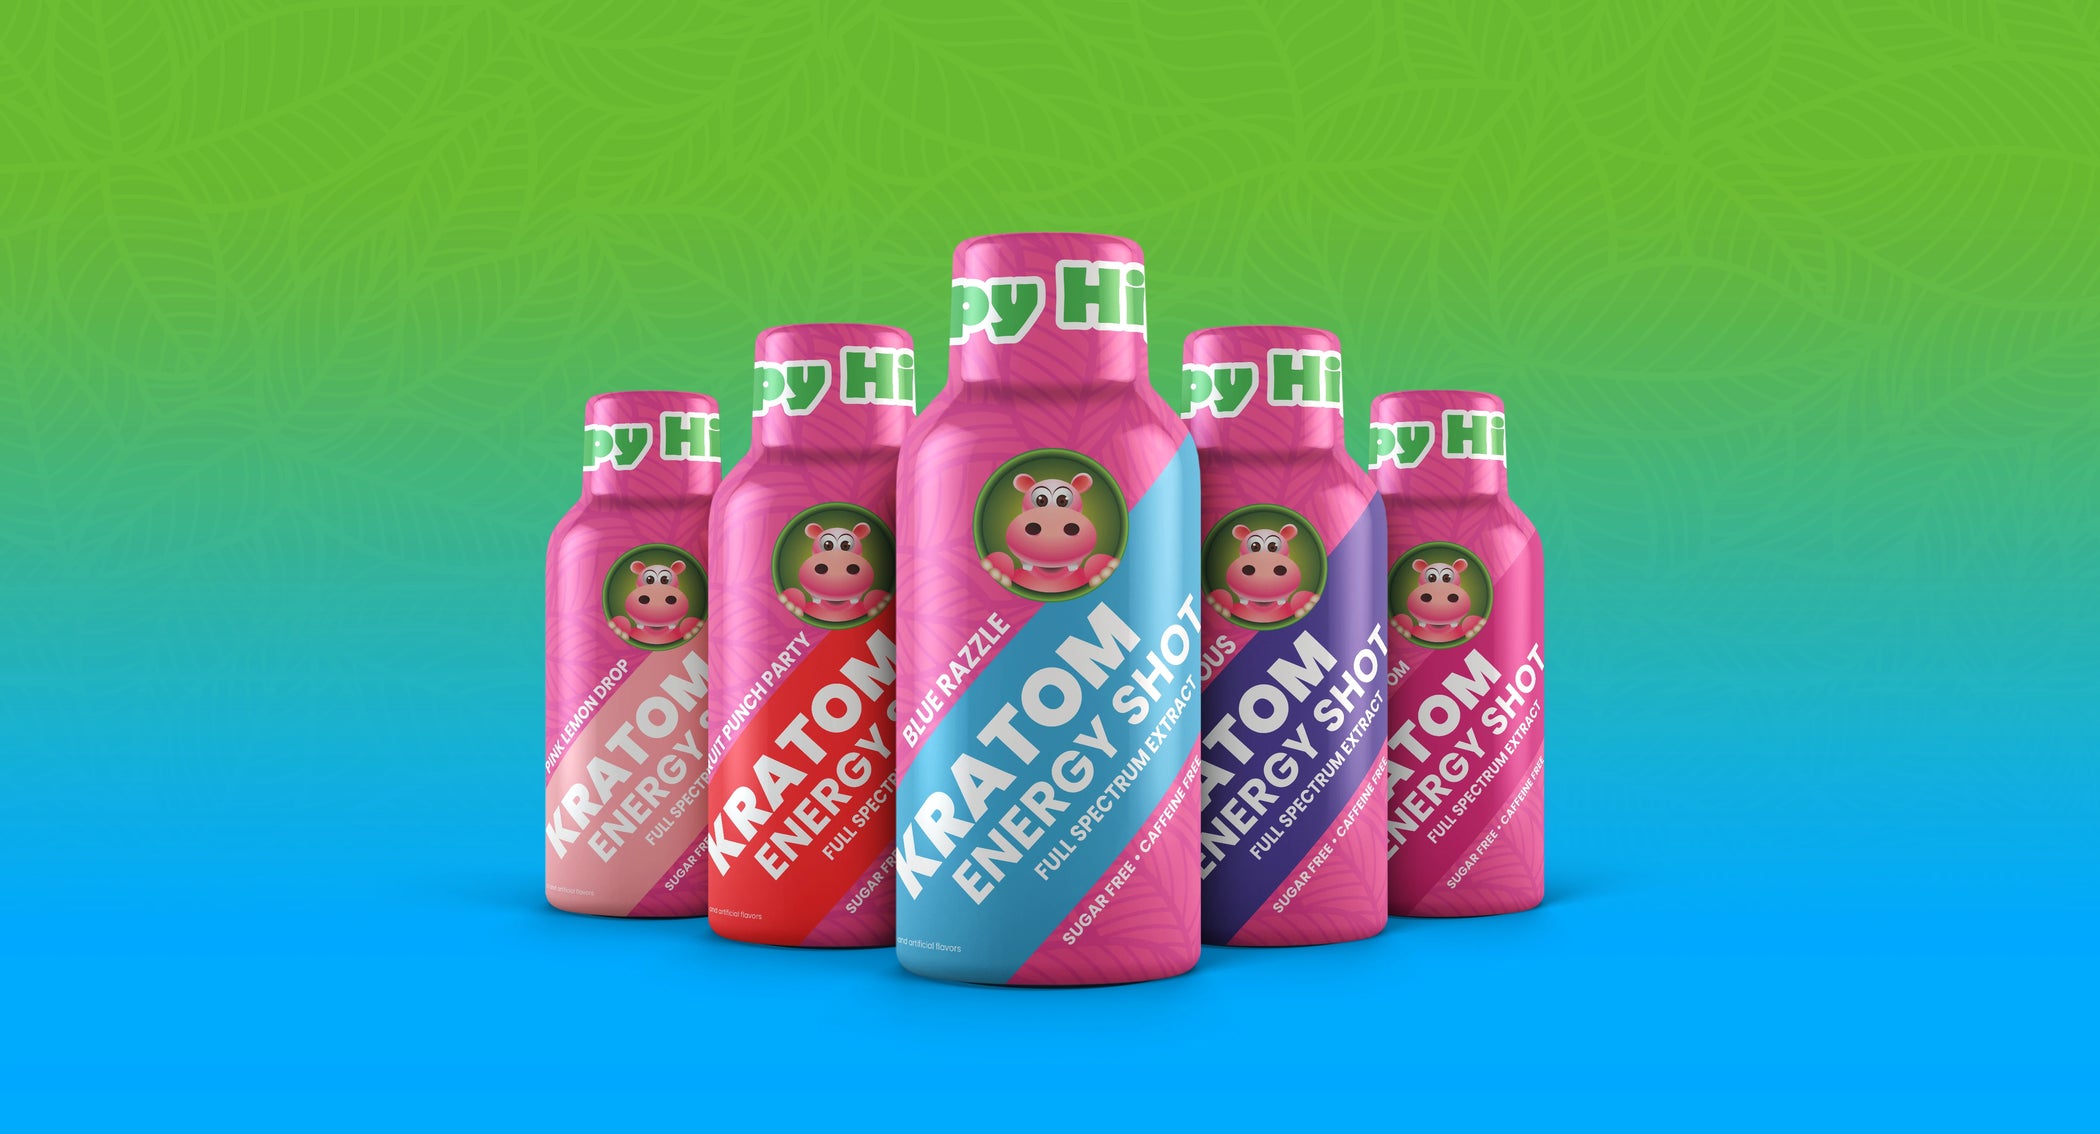 Photographic image depicting Happy Hippo branded kratom shot bottles against a gradient background of green to blue - There are 5 kratom shot bottles arranged like bowling pins; each of which correspond to the different flavors - Blue Razzle, Cherry PomPom, Pink Lemon Drop, Berry PomPom, Grapelicious, Fruit Punch Party